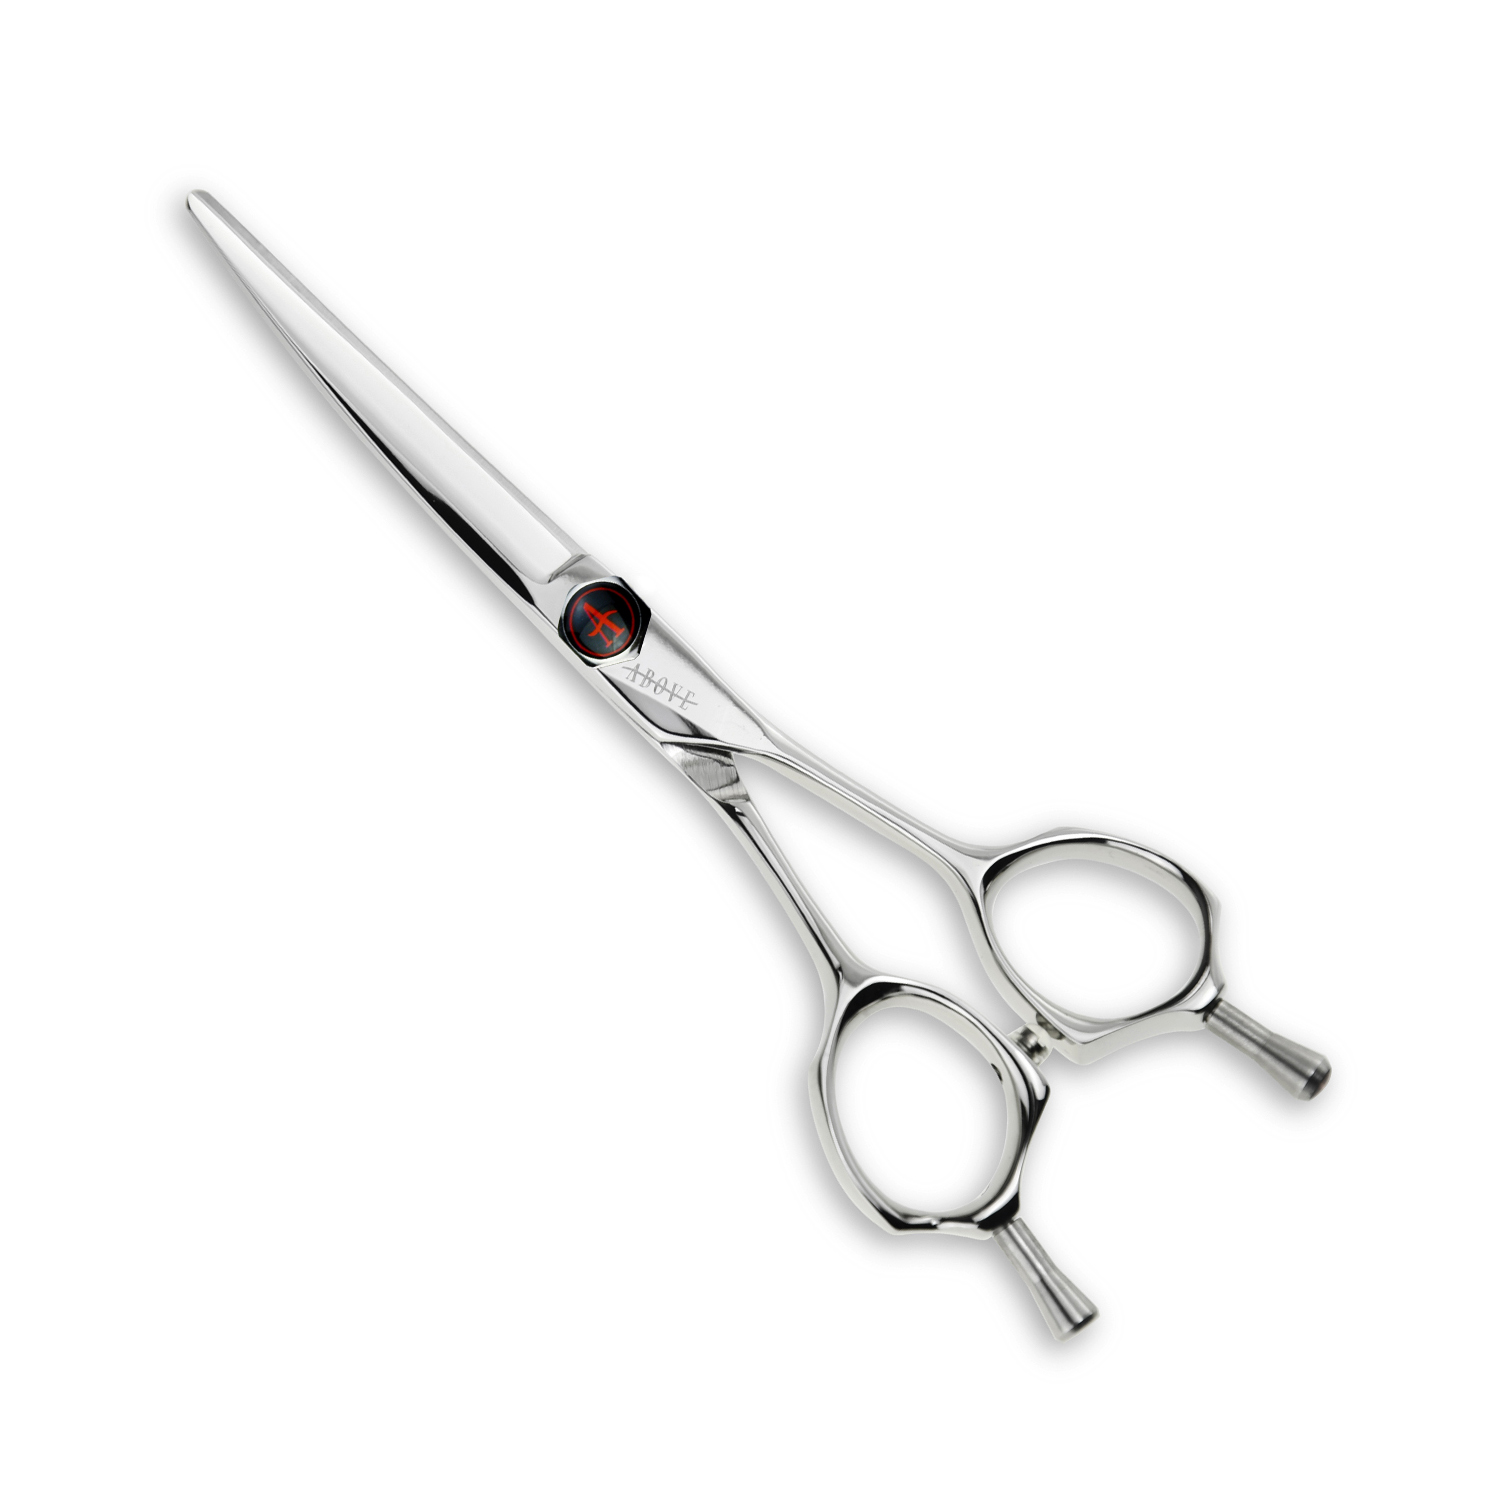 Above Shears Professional Hair Cutting Scissors Flipper Curved Shears. Hair Scissors Set, Hair Scissors Kit. 5.75 inch